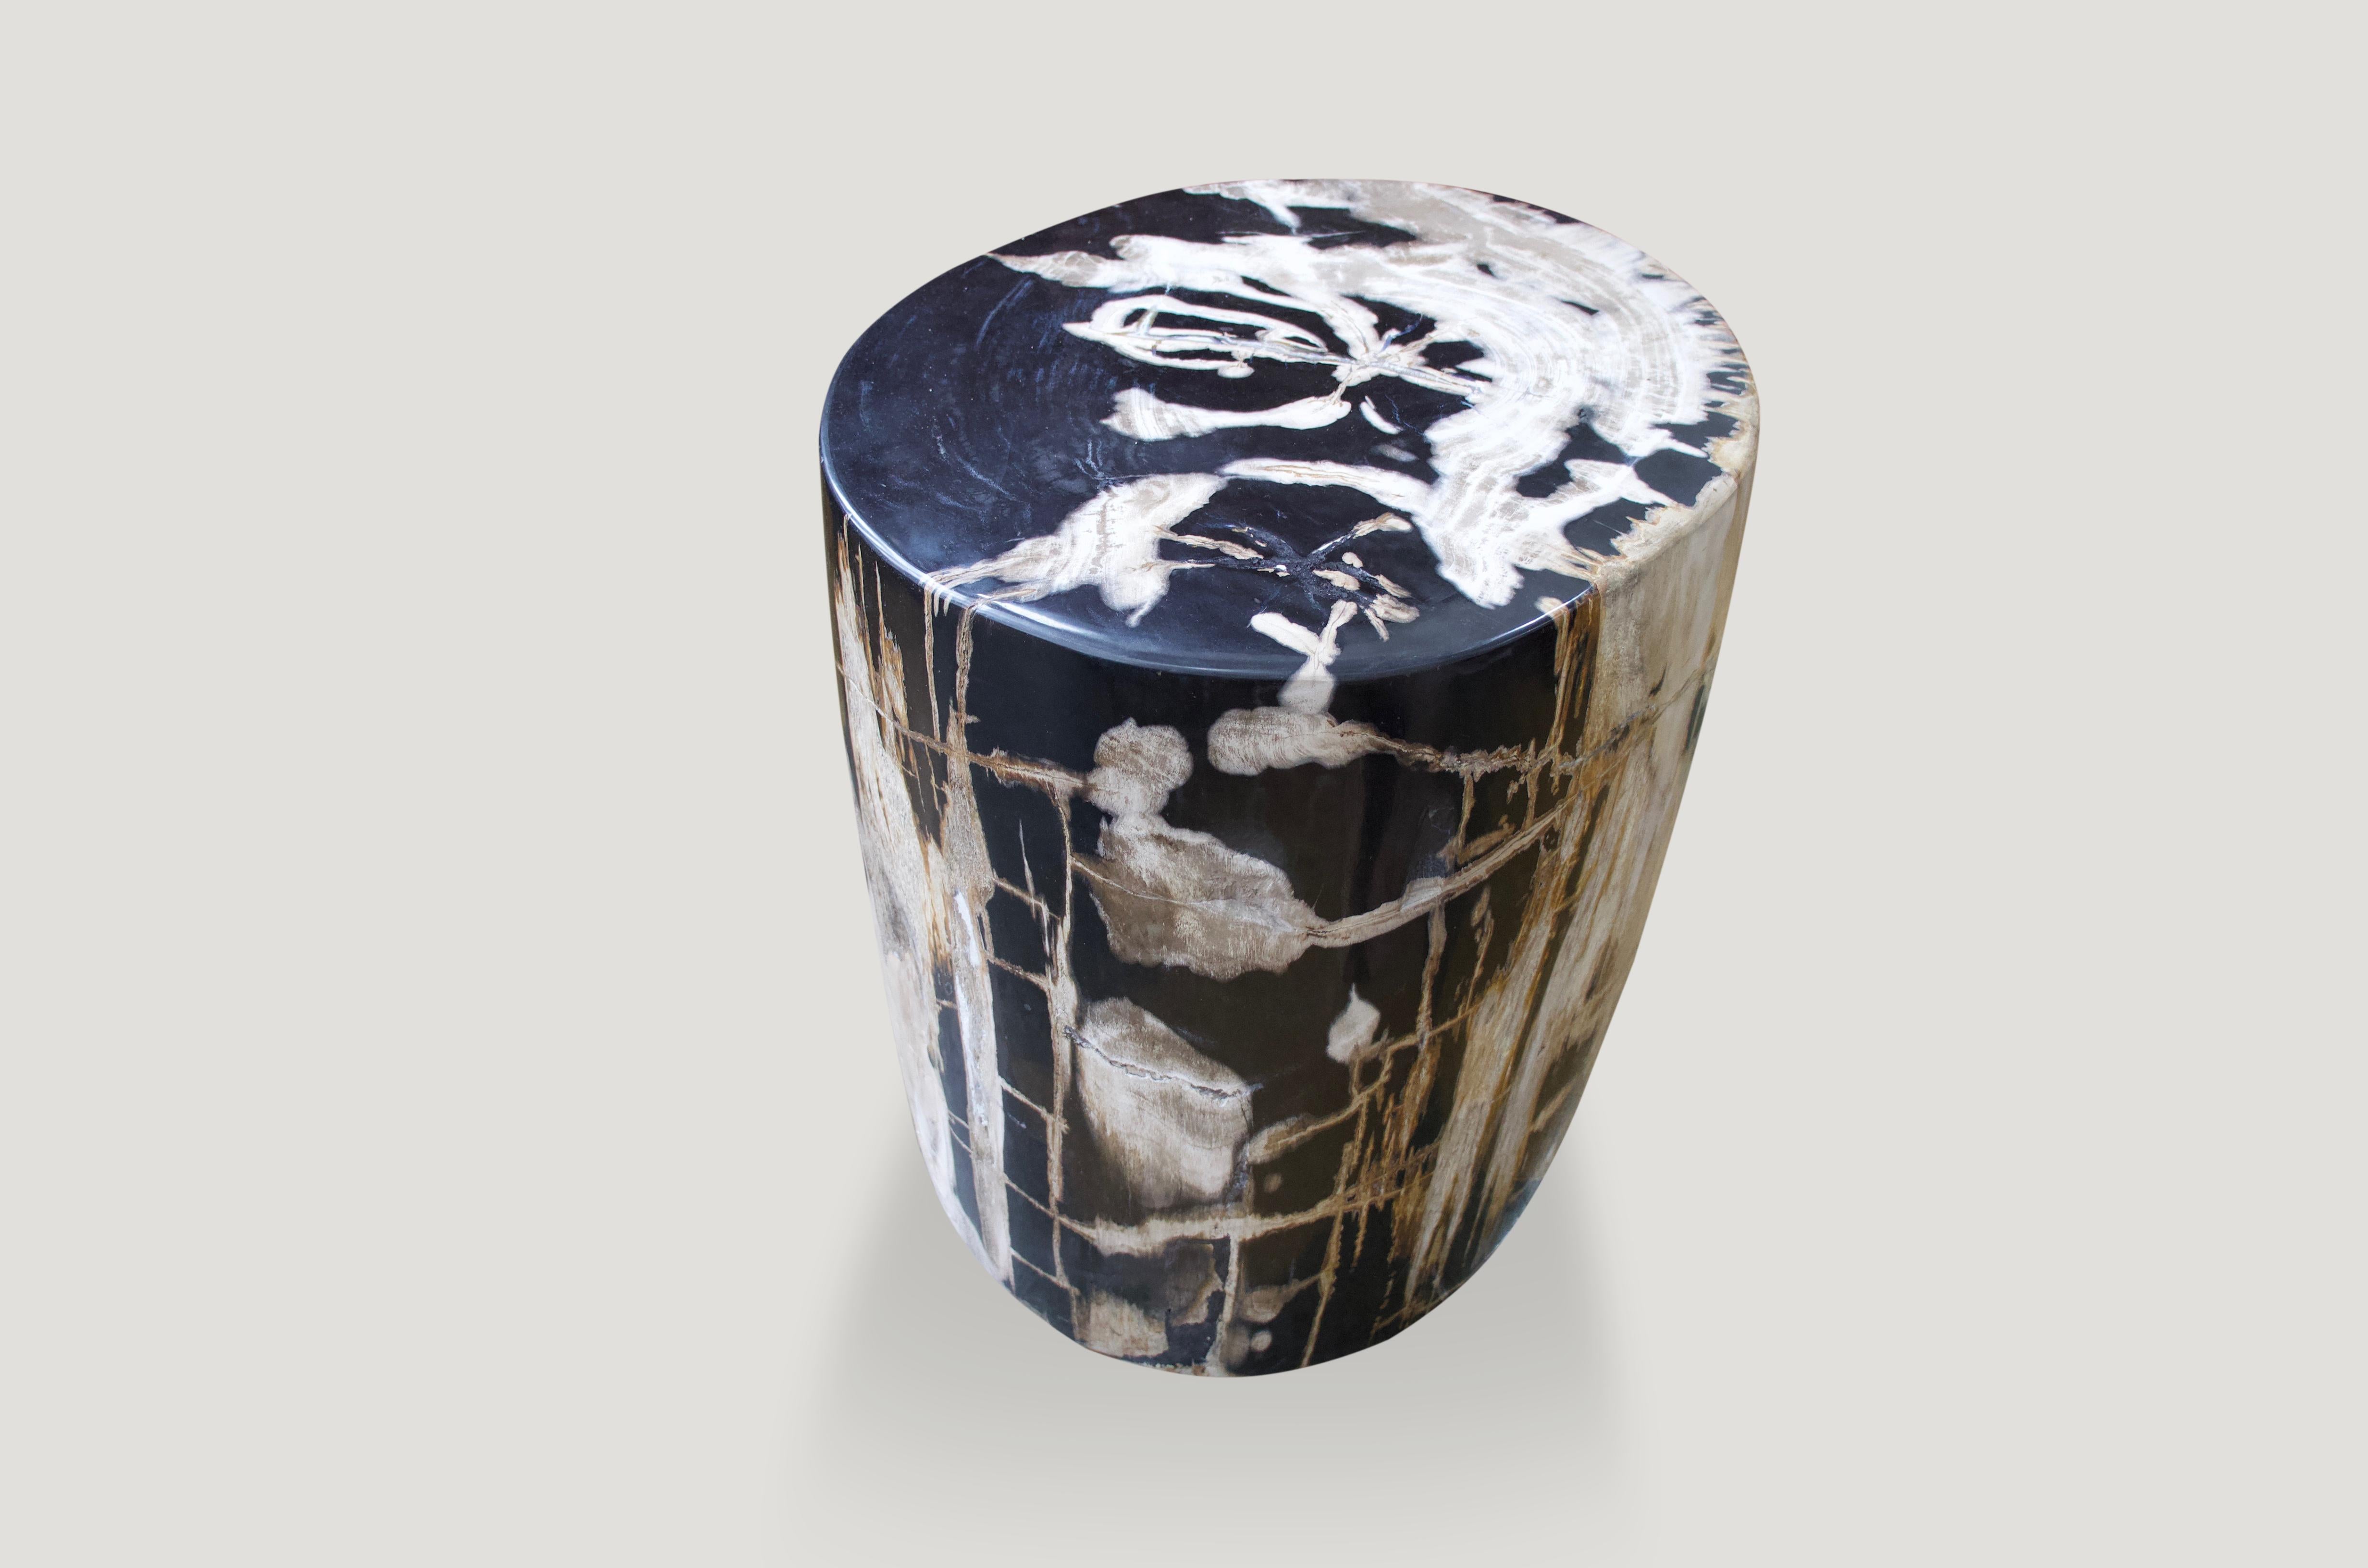 Fabulous detail in this high quality petrified wood side table.

We source the highest quality petrified wood available. Each piece is hand selected and highly polished with minimal cracks. Petrified wood is extremely versatile – even great inside